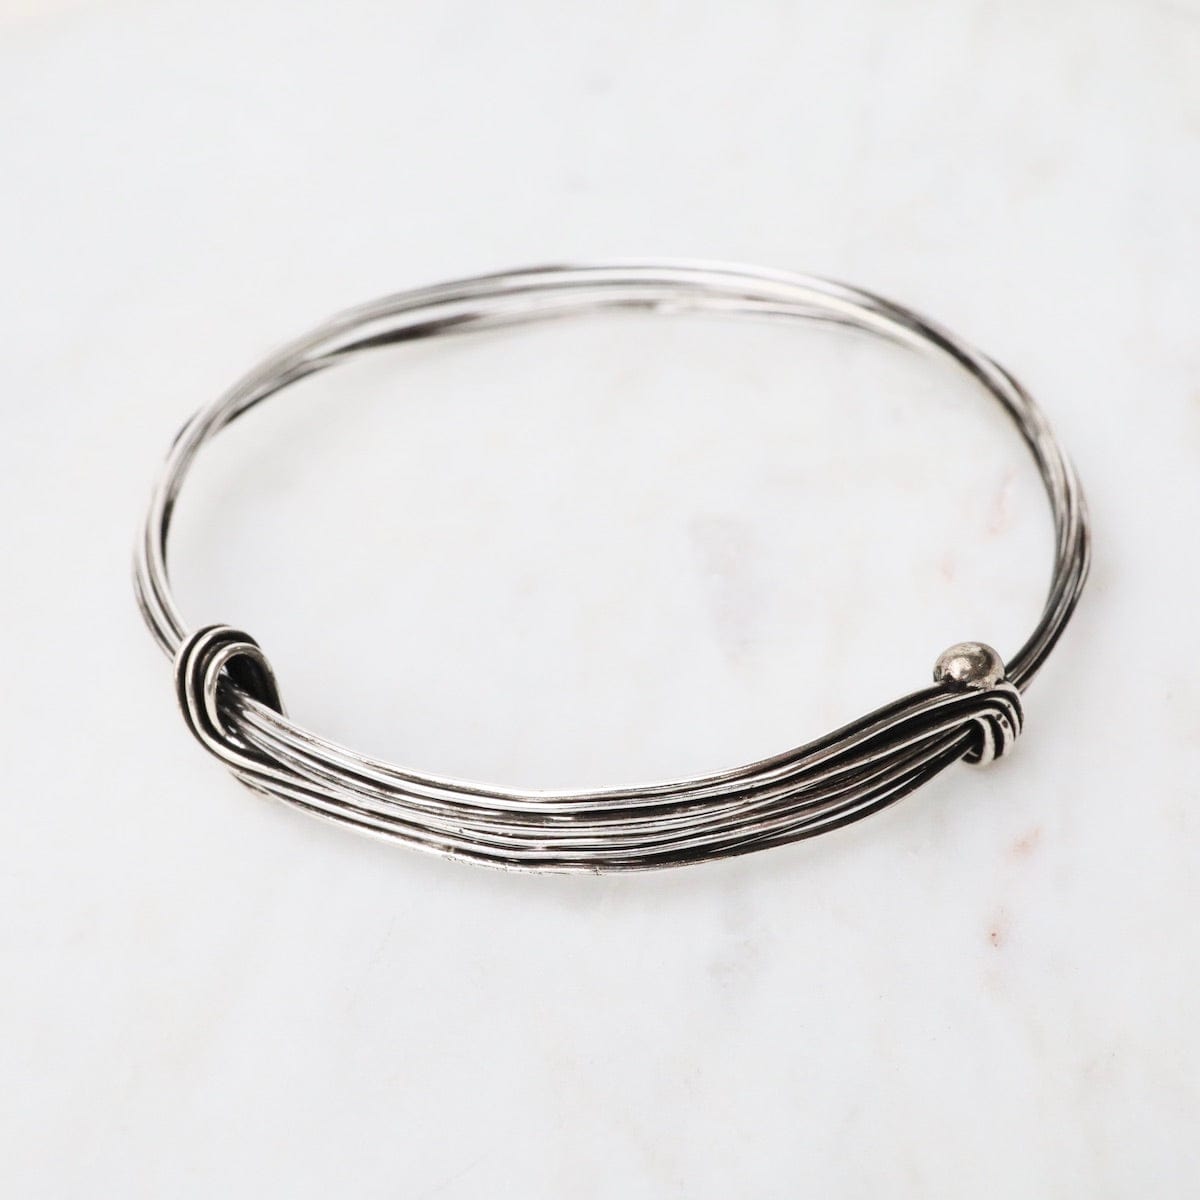 Elephant Hair Inspired Bangle - Shiny Sterling Silver - 5 Lines – Dandelion  Jewelry